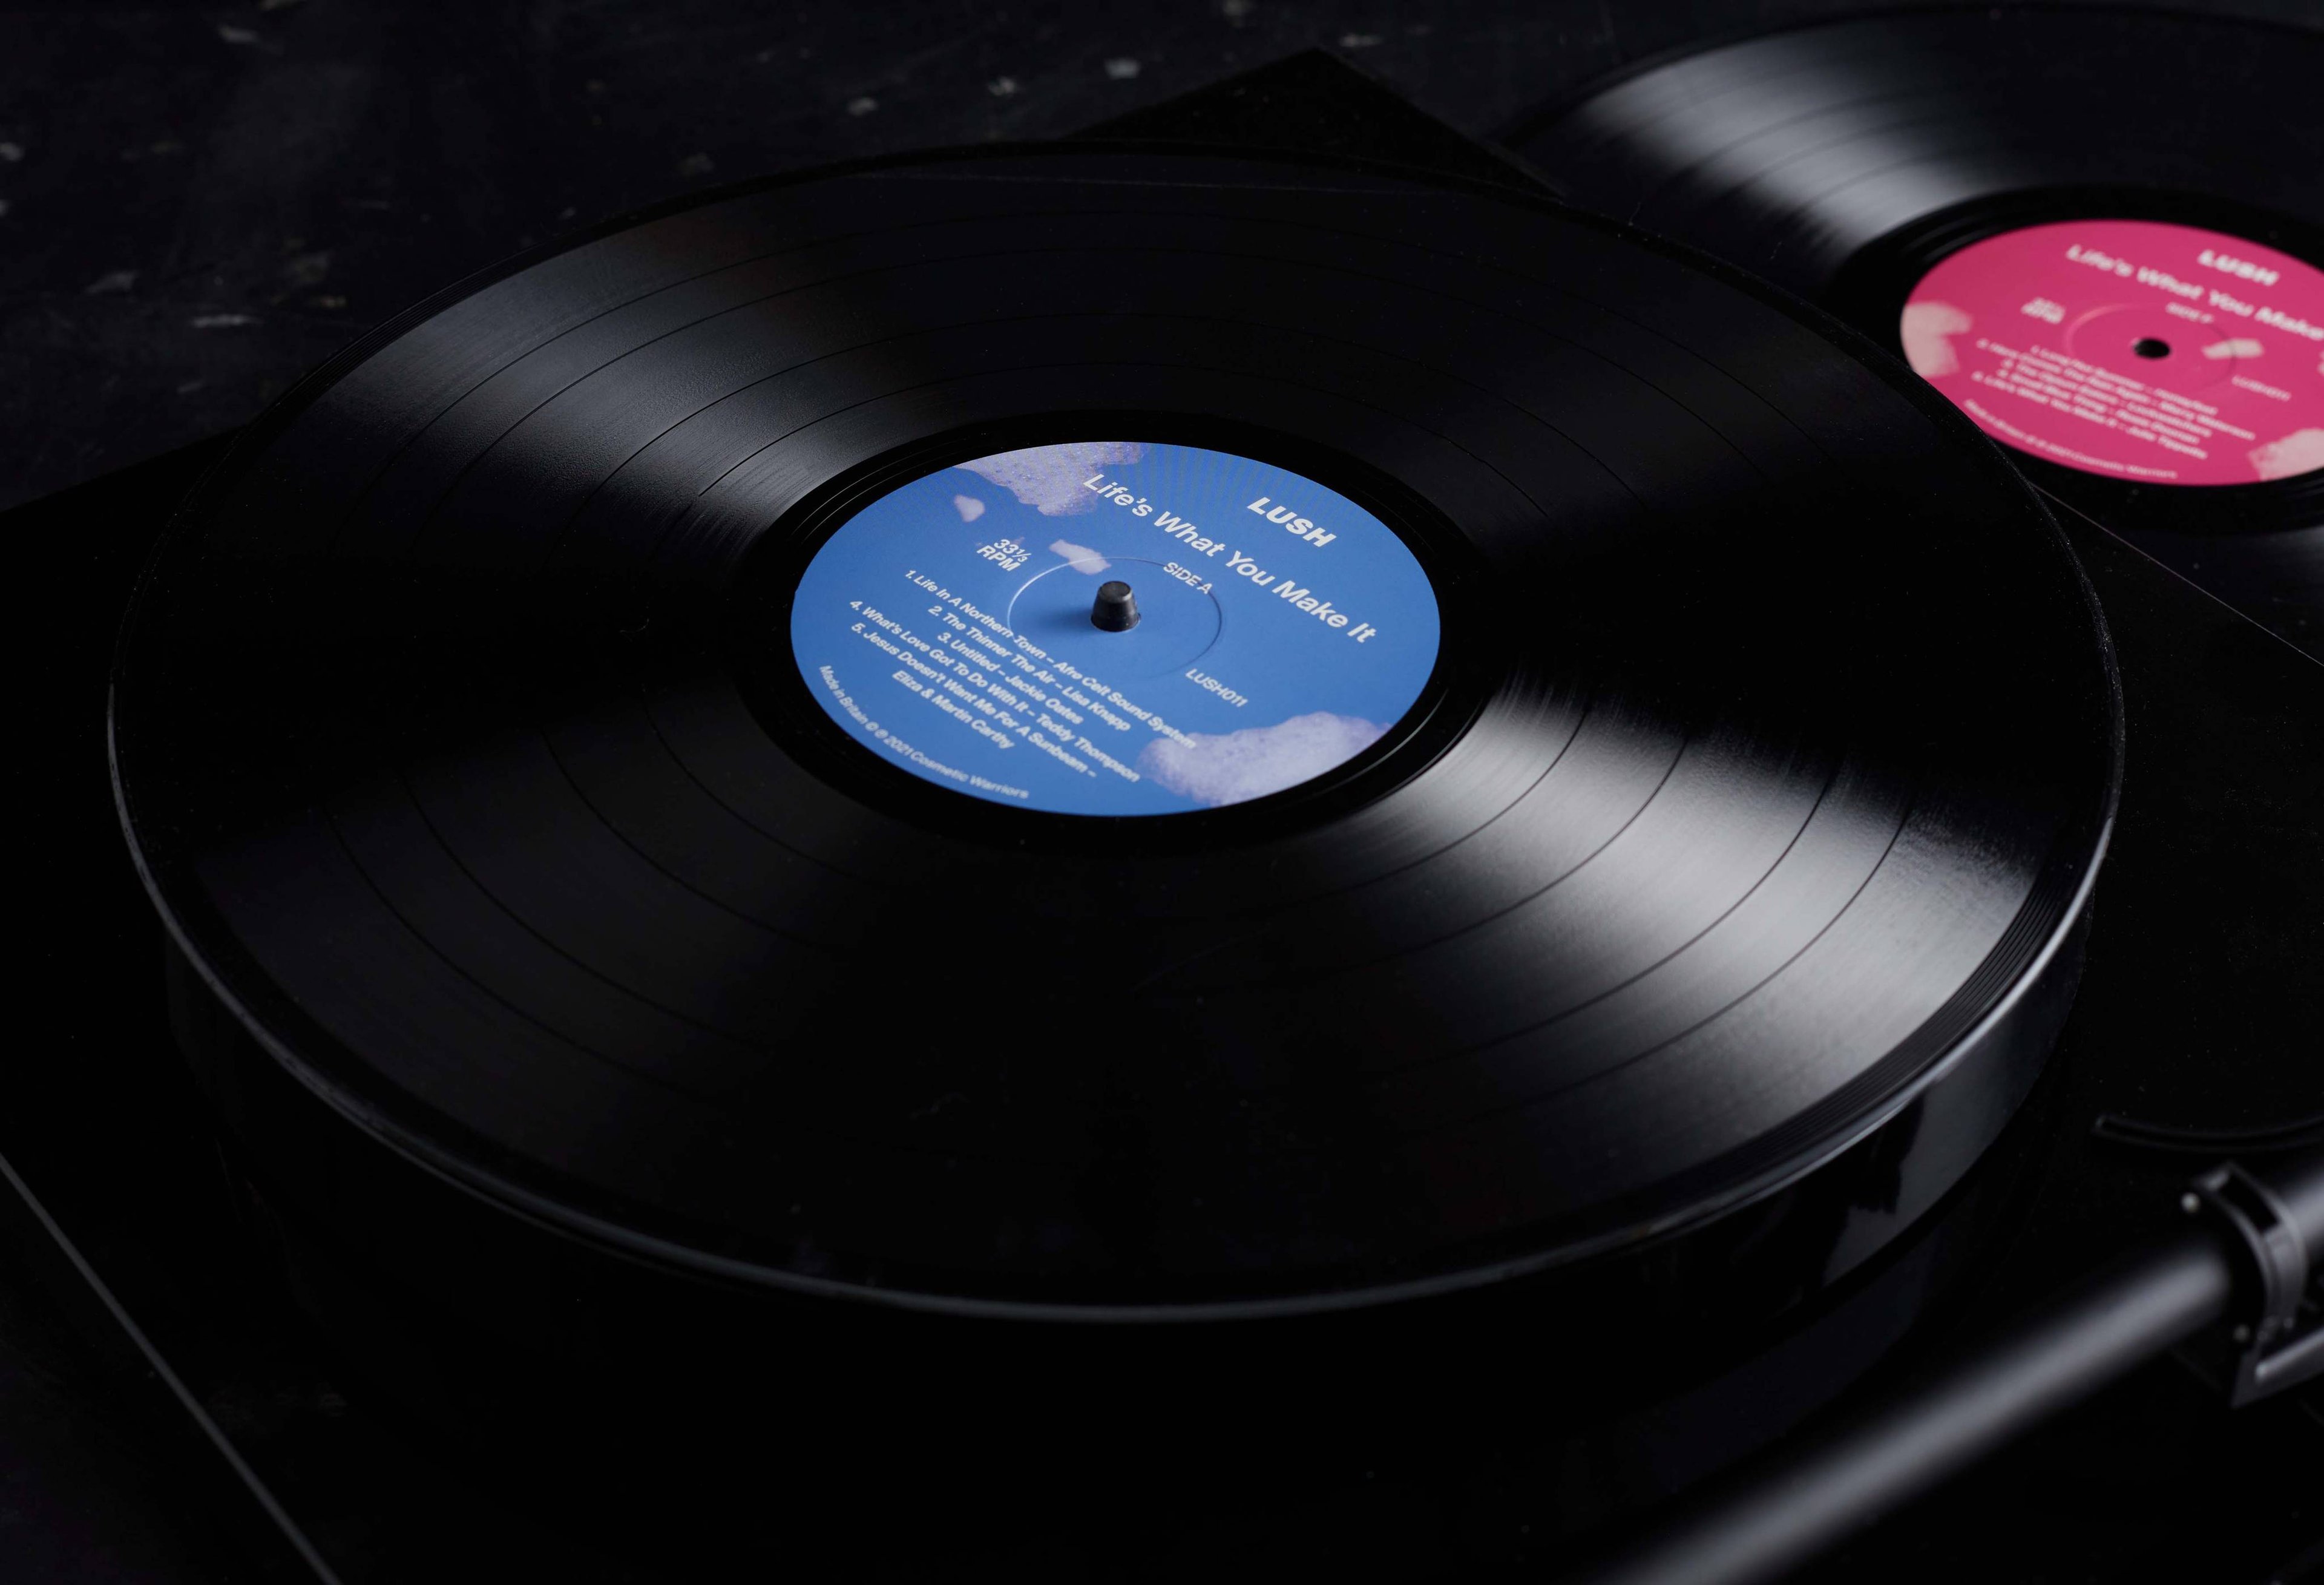 A close up of both records, one with a blue label and one pink, with the blue on a record deck.